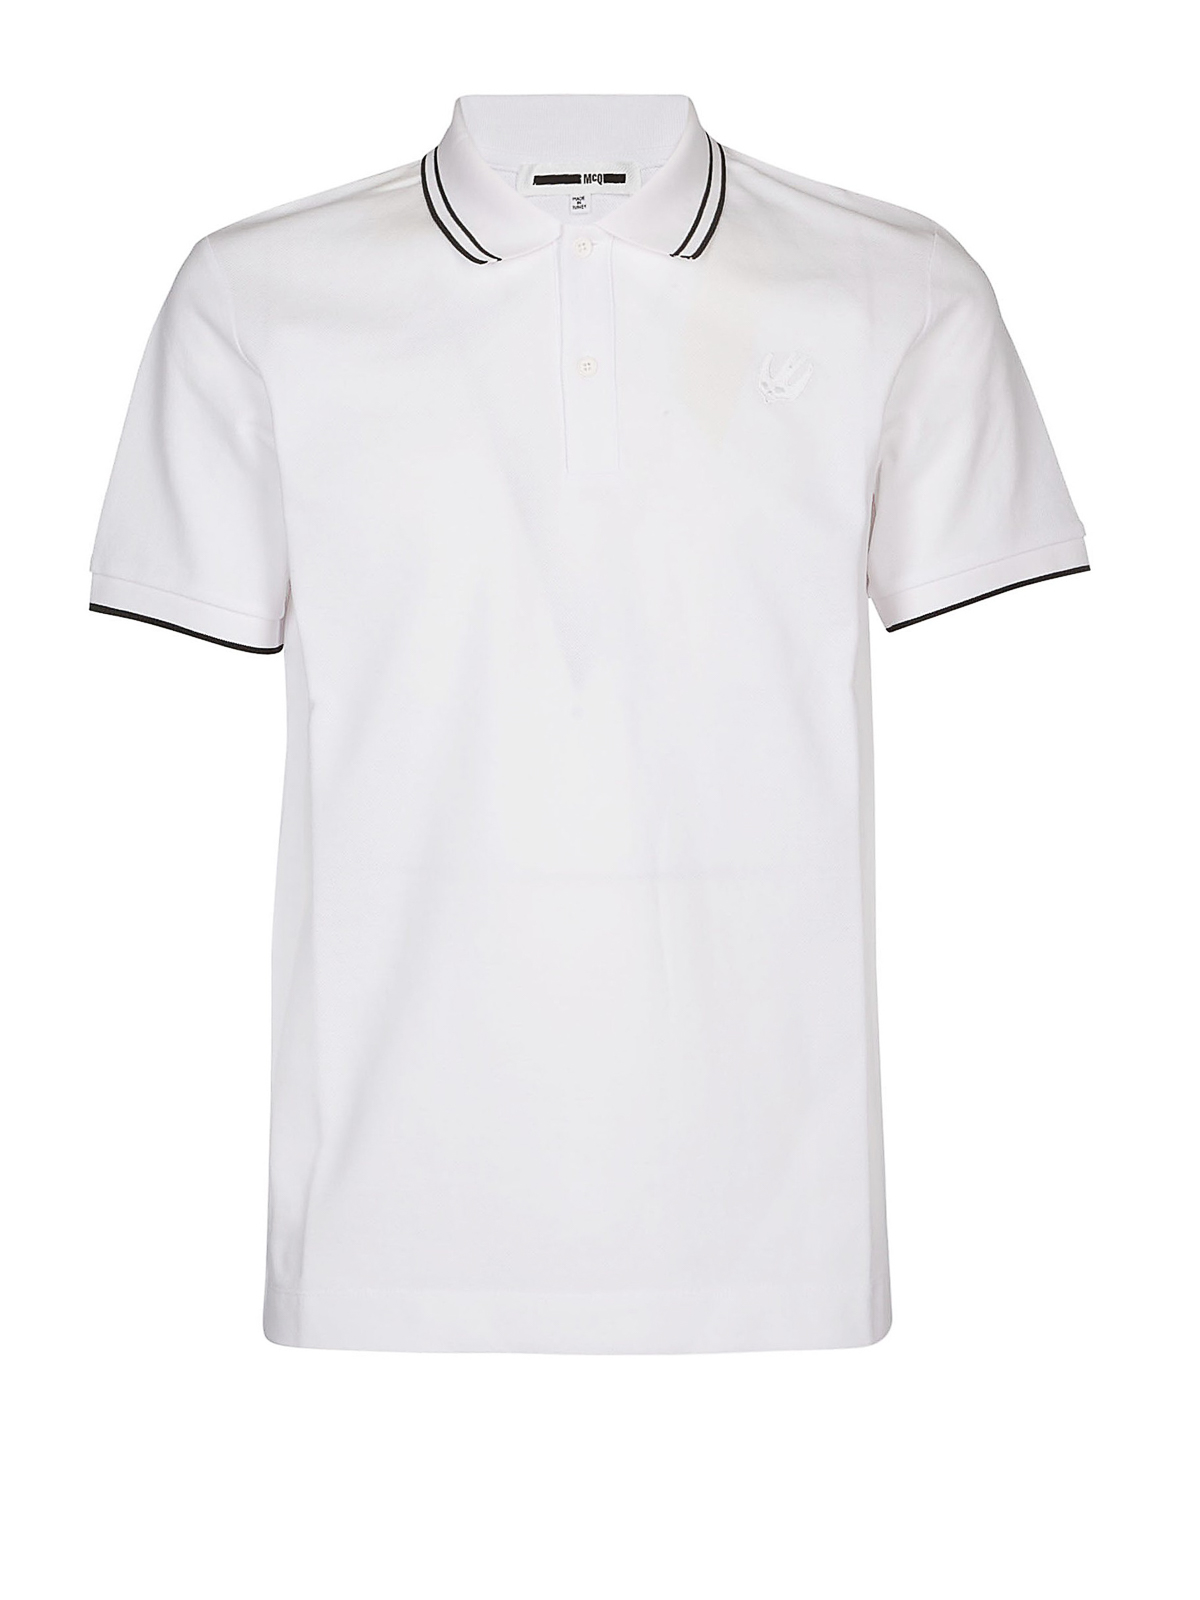 Mcq By Alexander Mcqueen Swallow Embroidered White Polo Shirt